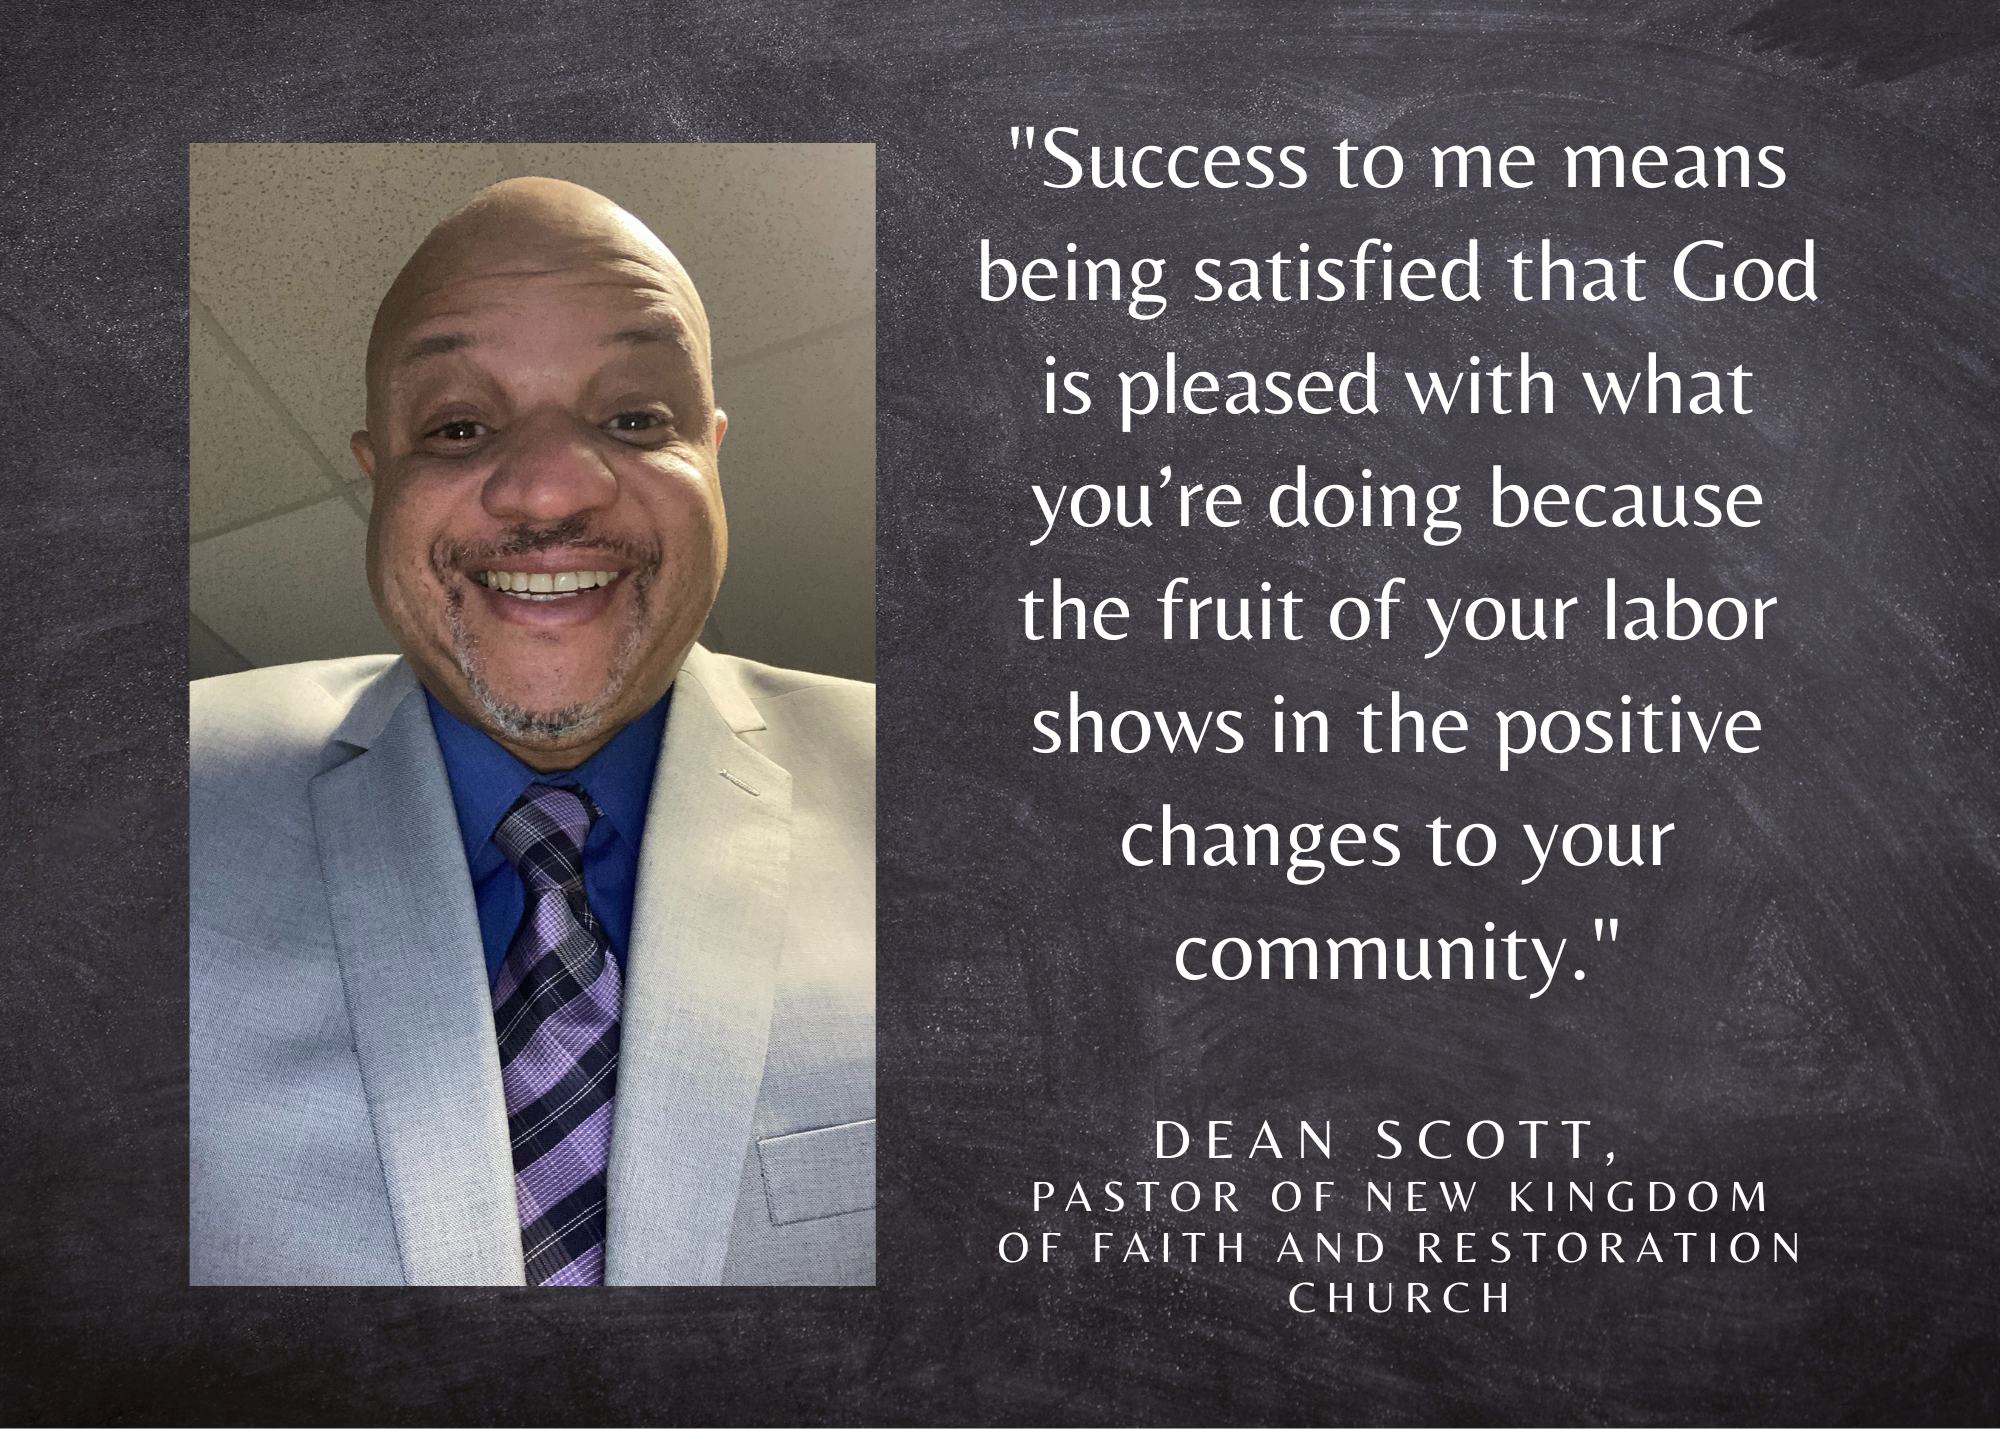 Dean Scott, Pastor of New Kingdom of Faith and Restoration Church, is the Subject of a New Magazine Interview